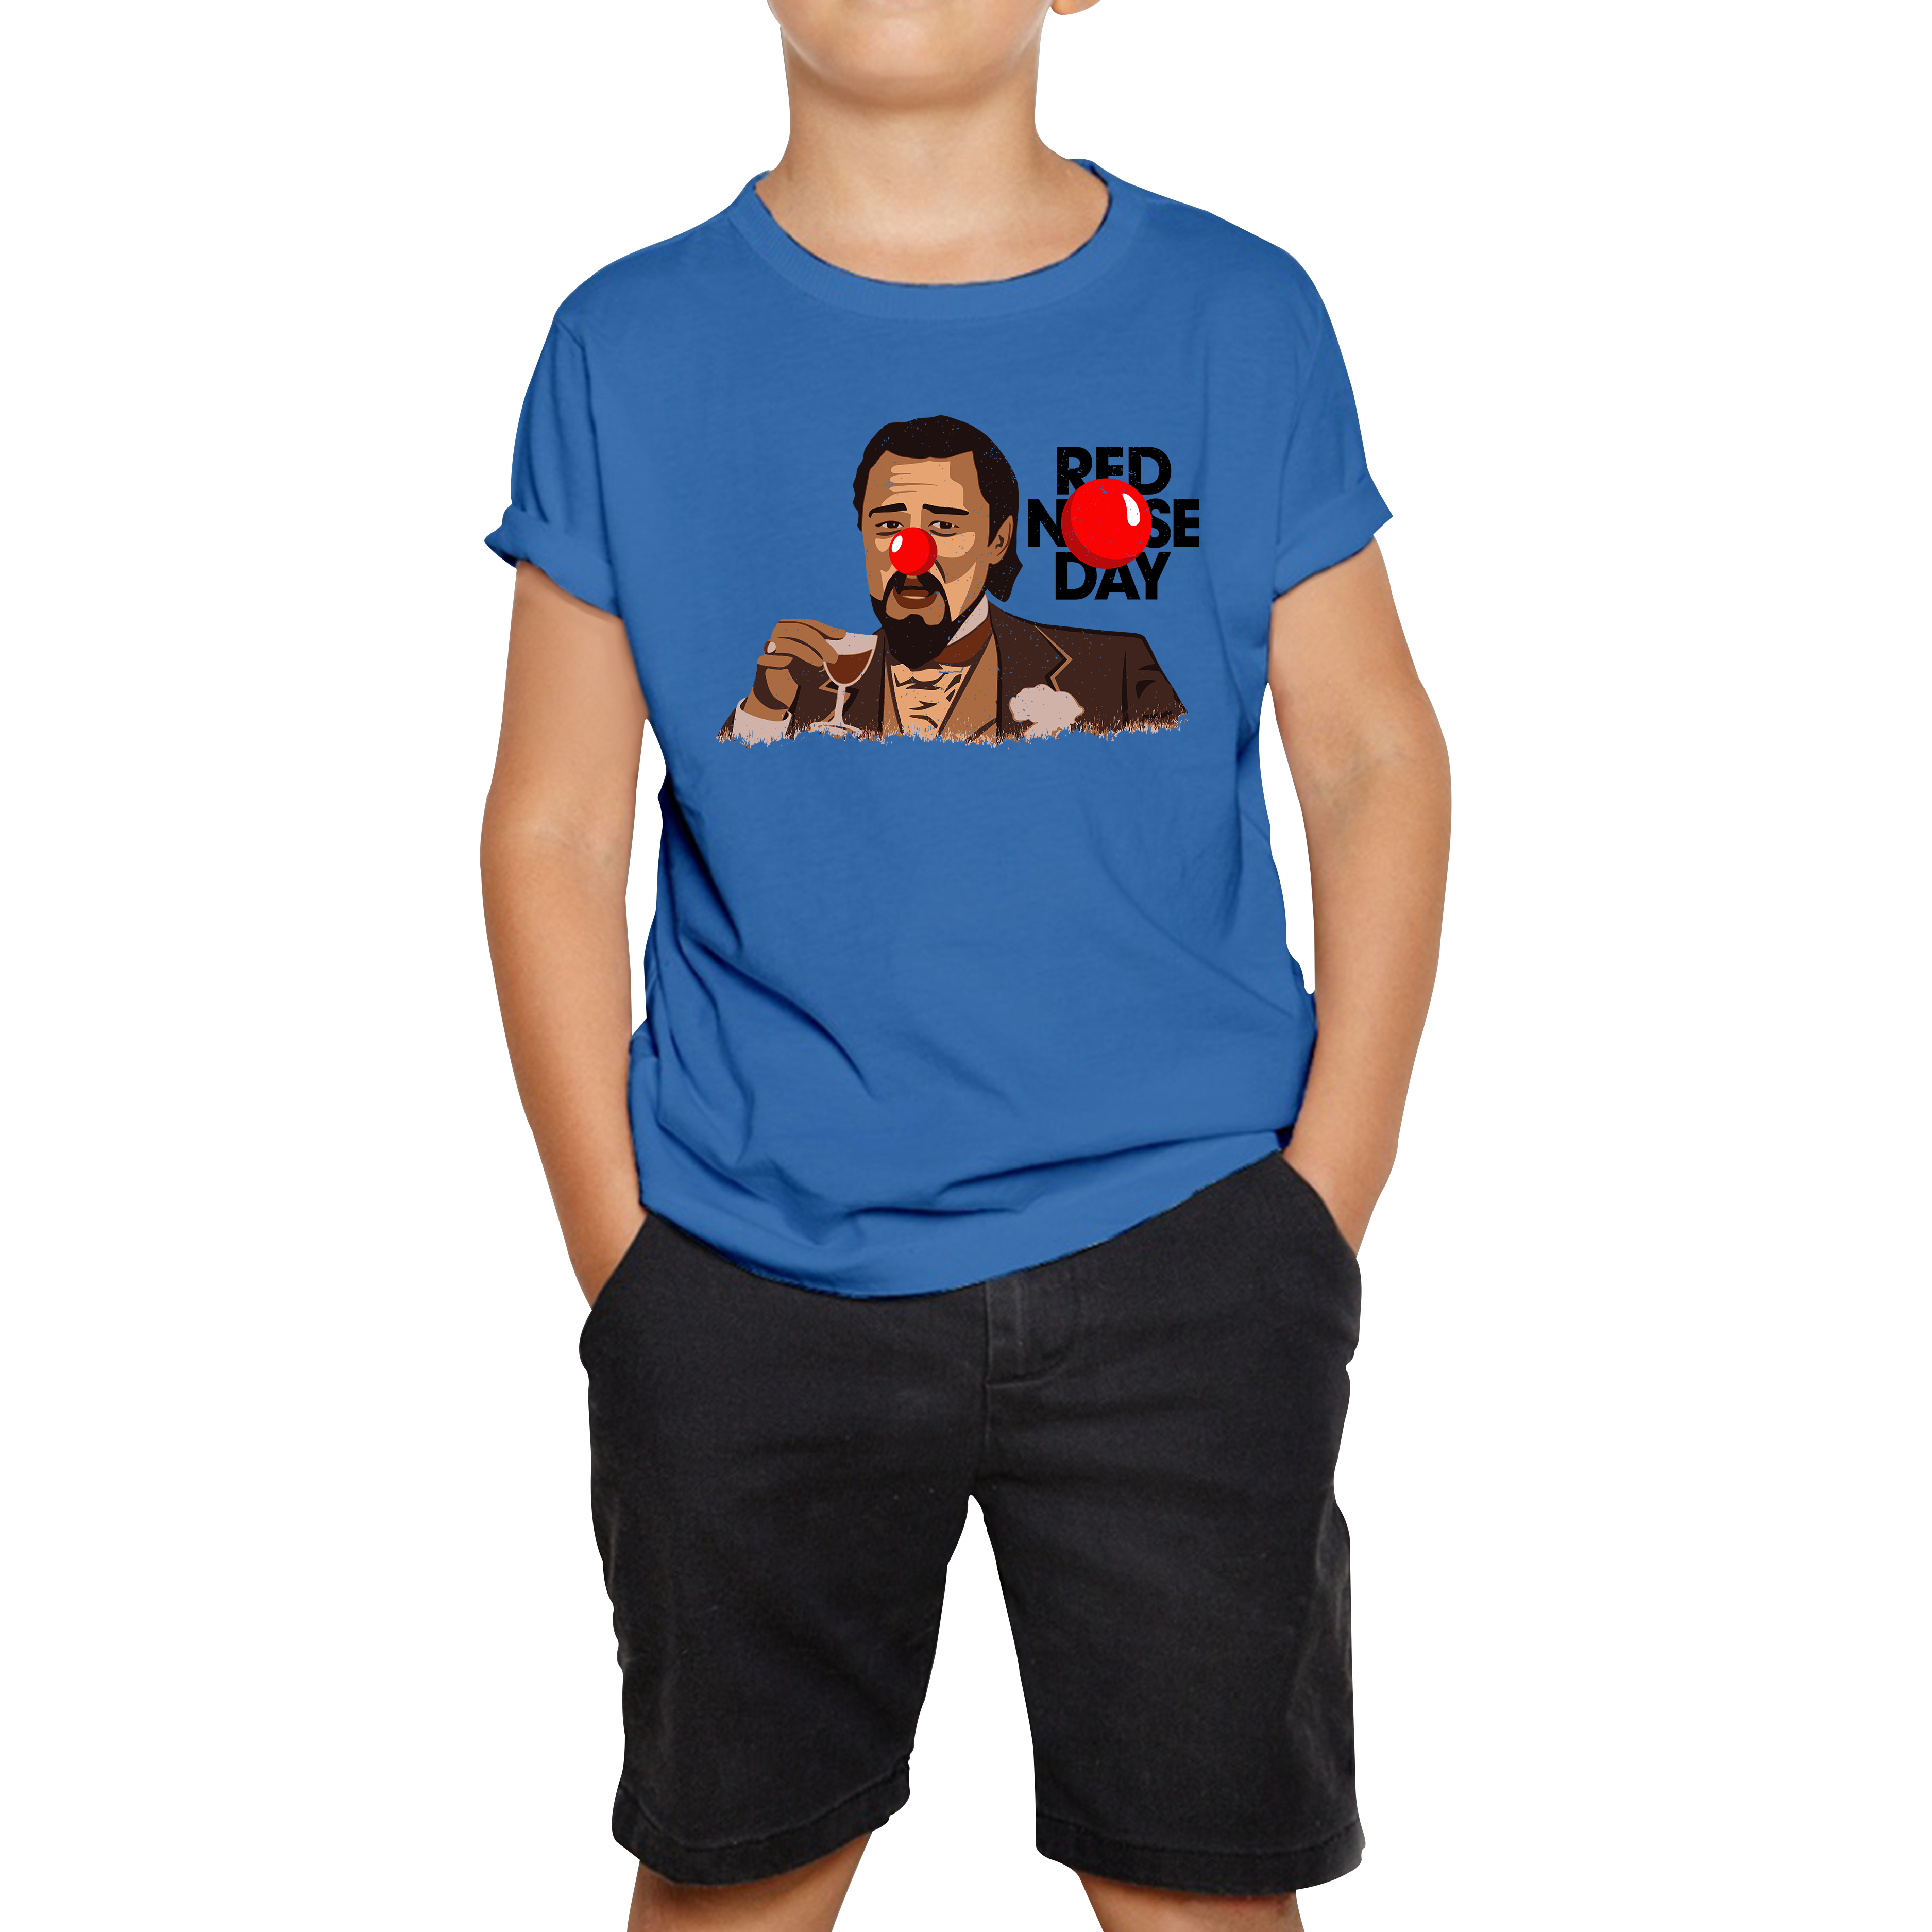 Leonardo Dicaprio Laughing Meme Red Nose Day Kids T Shirt. 50% Goes To Charity